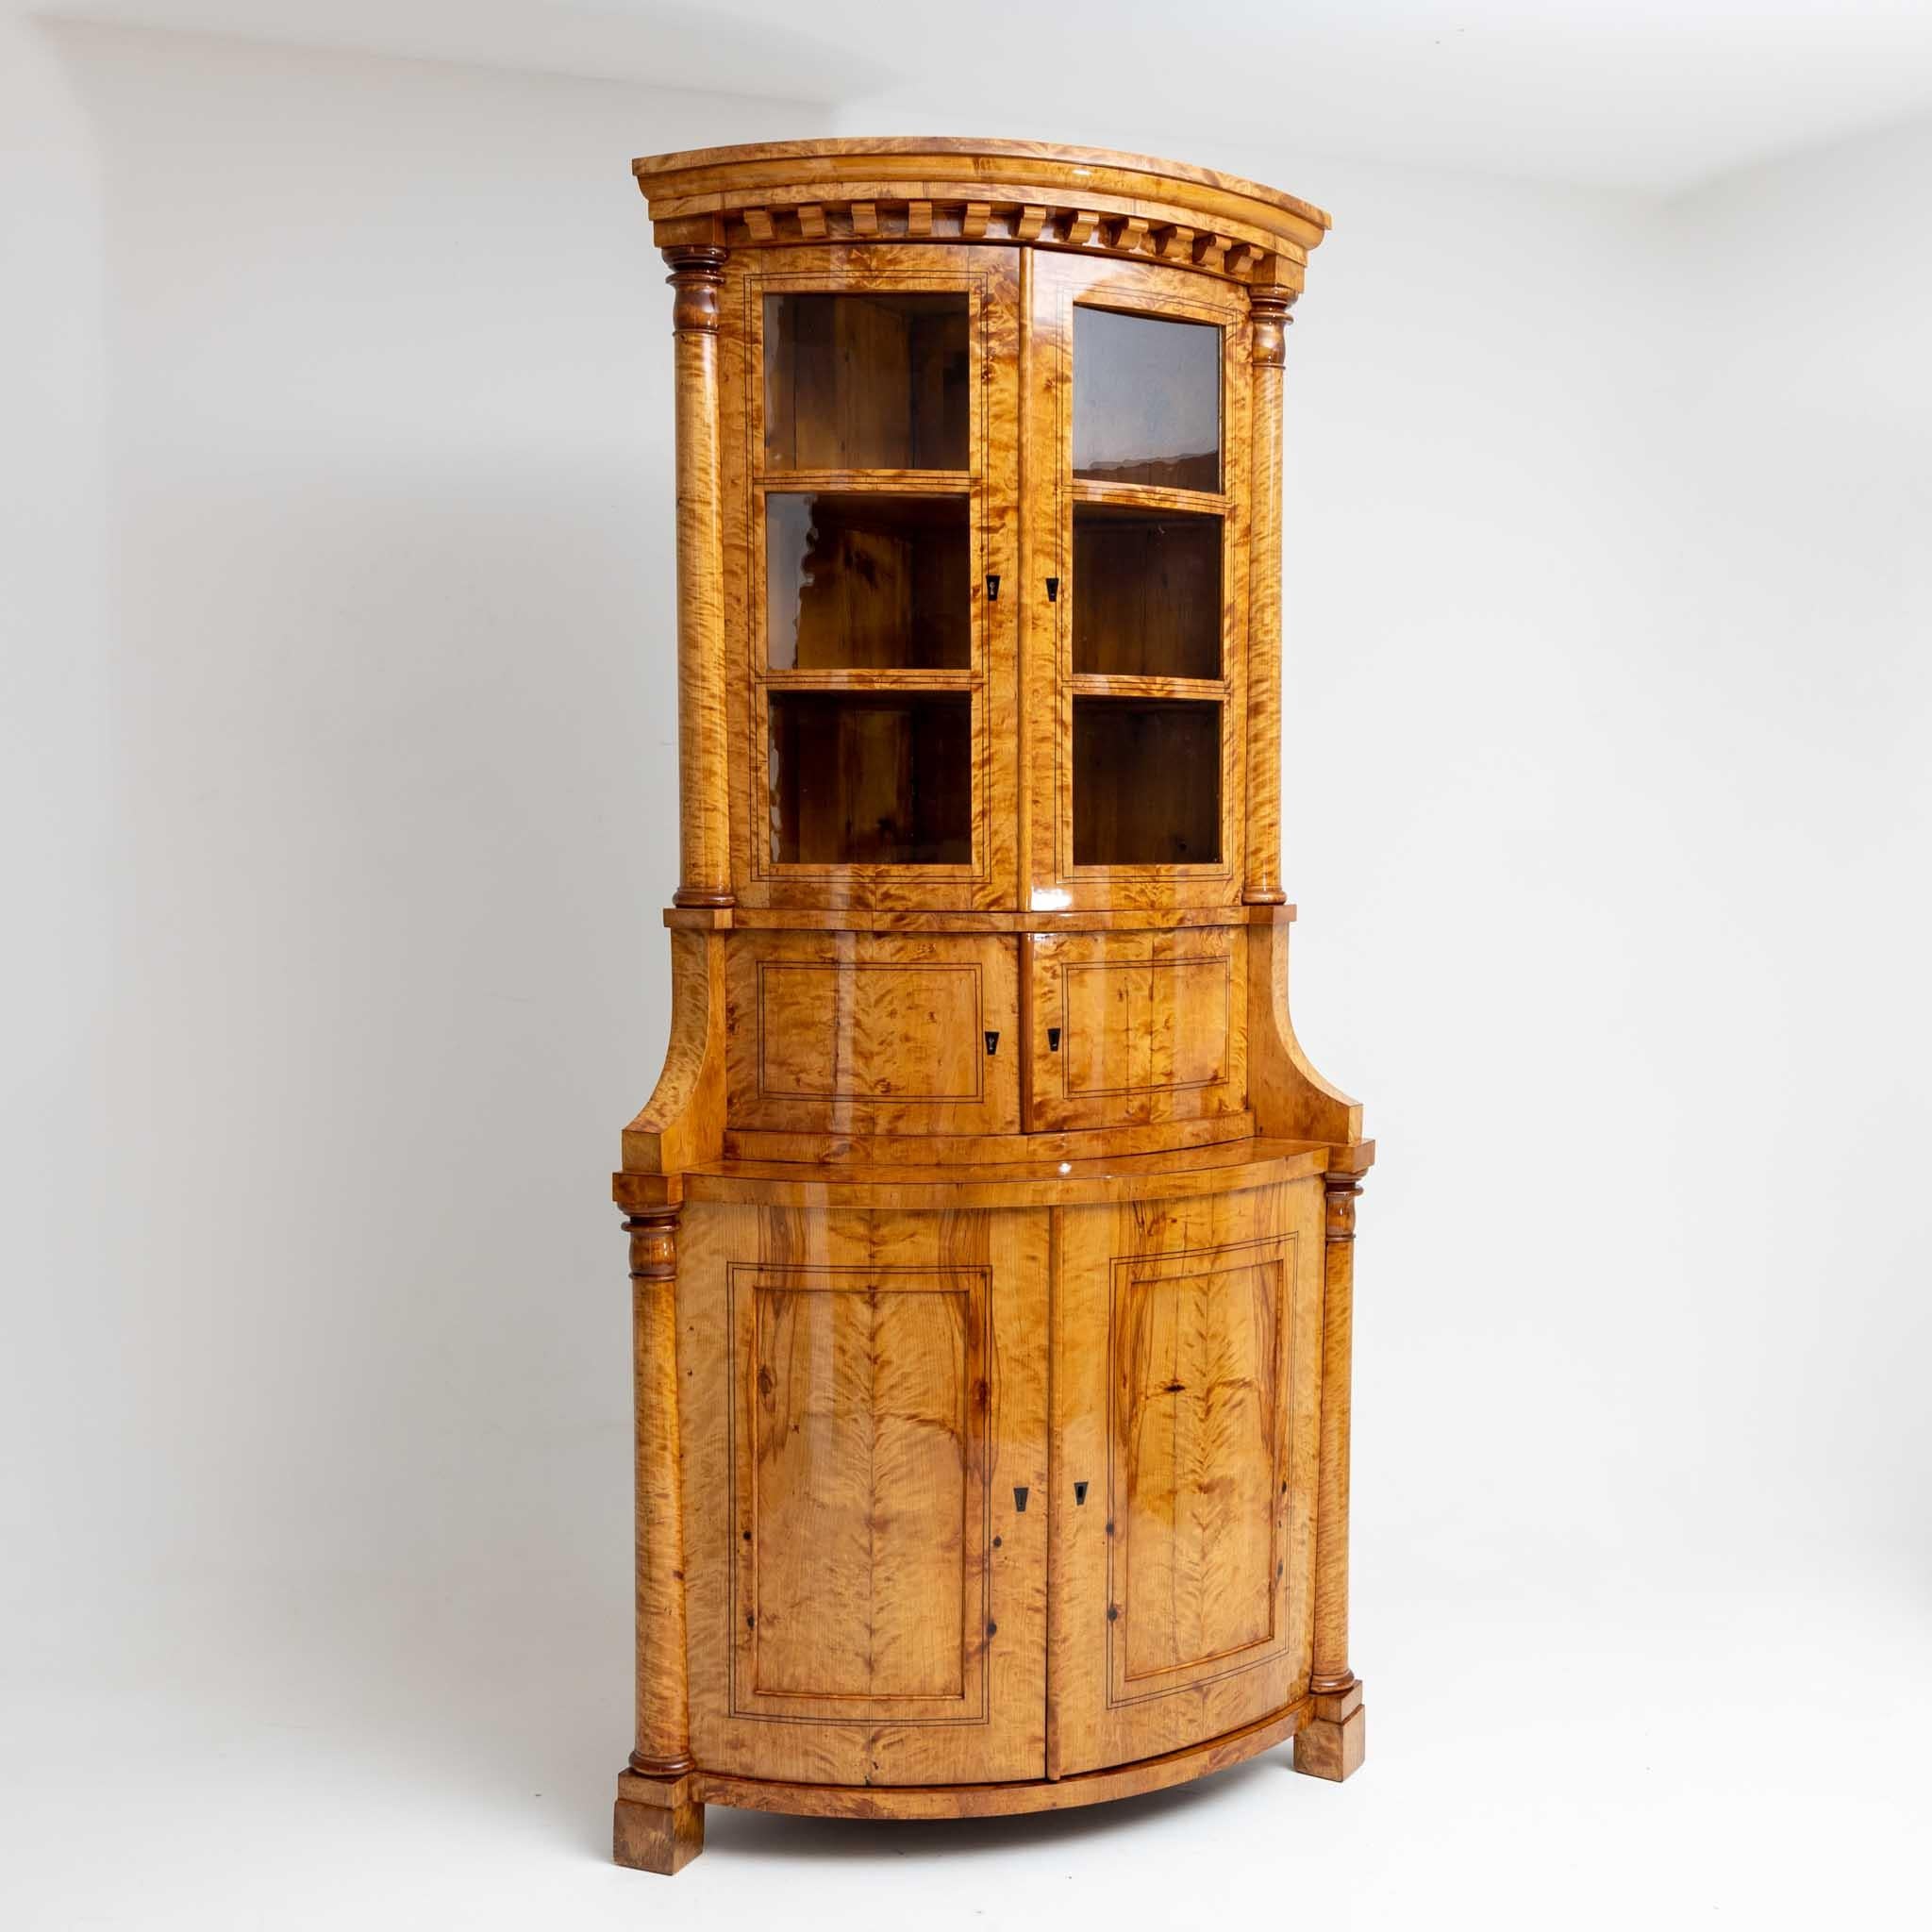 A Biedermeier corner display case with a curved front, a two-door lower section with flanking column decoration, a central section also with two doors and a display case top with glazed doors and three shelves. The corner display case is veneered in